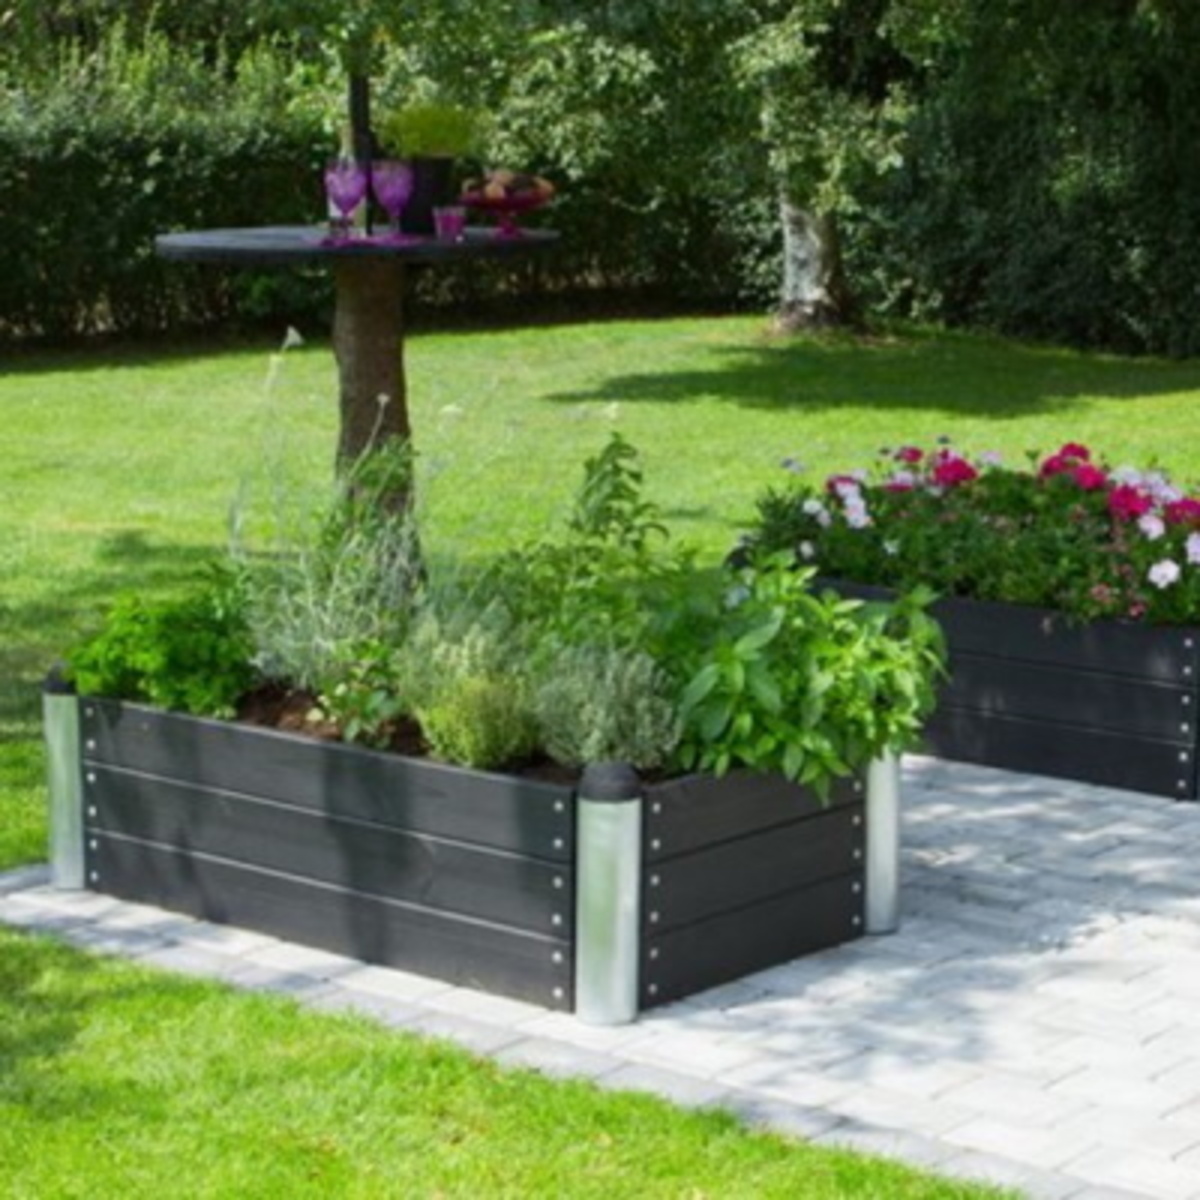 Raised planter boxes from wood and galvanized steel